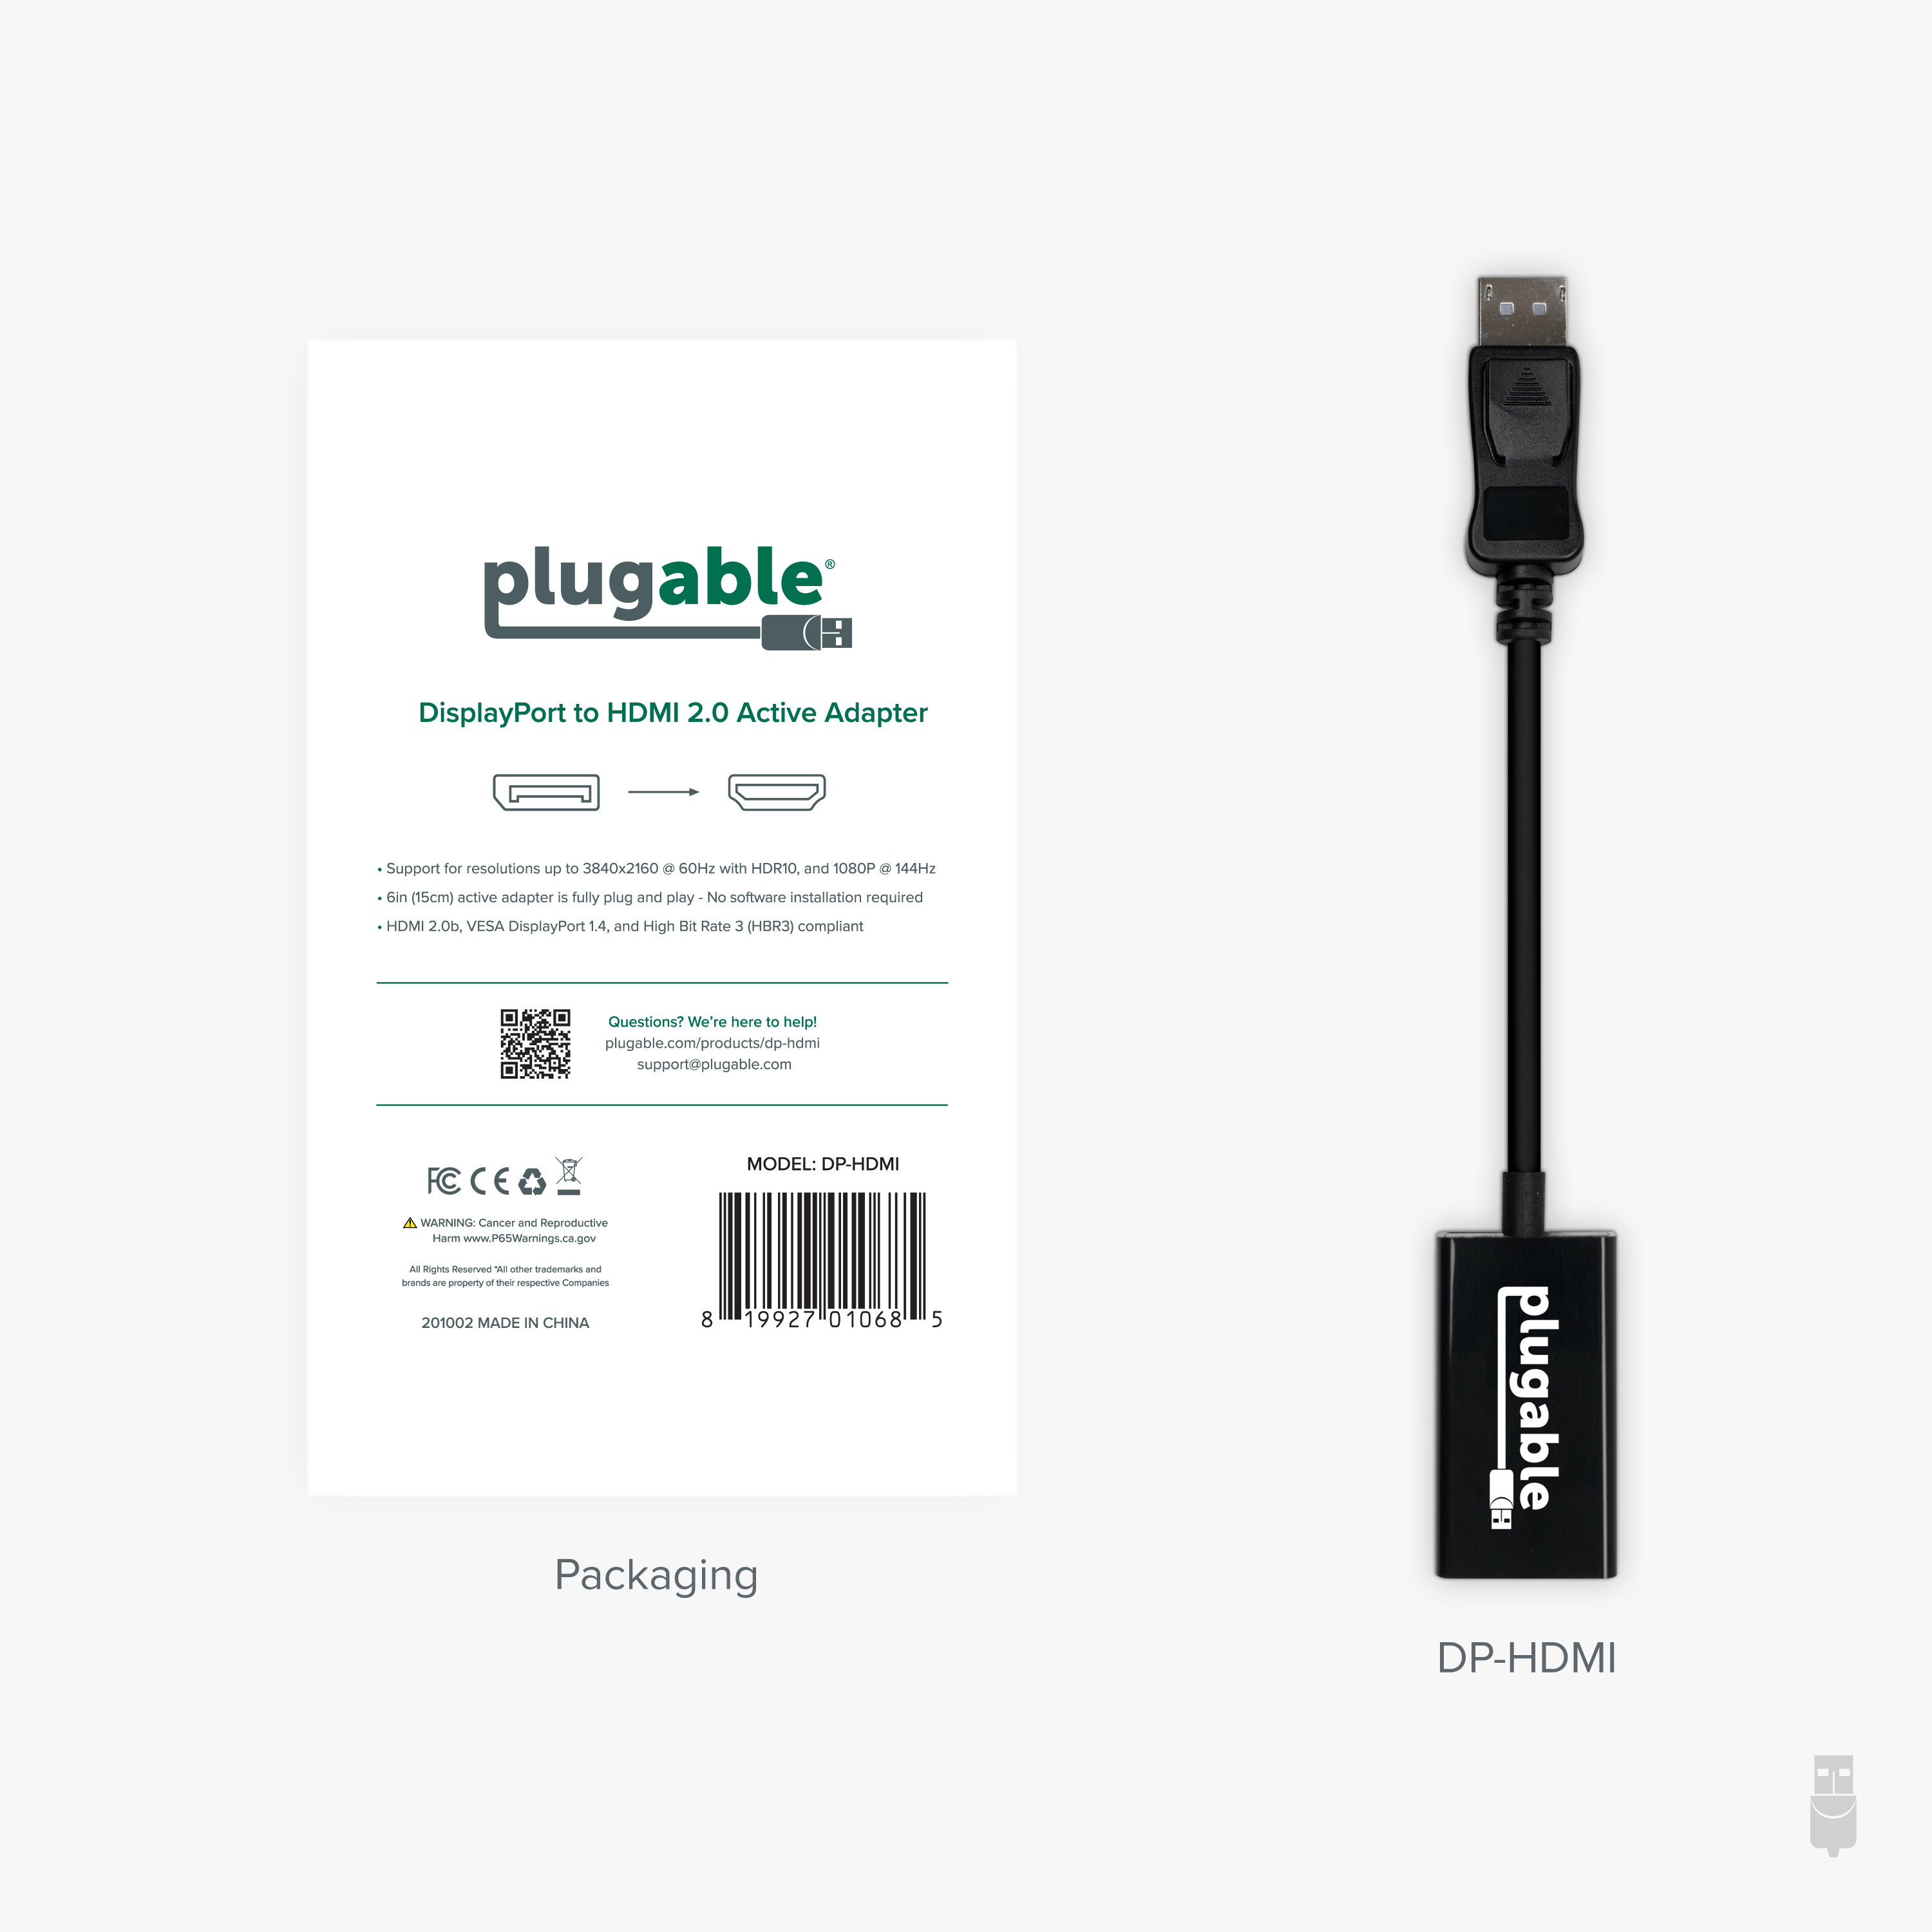 Plugable Active DisplayPort to HDMI Adapter - Connect any DisplayPort-Enabled PC or Tablet to an HDMI Enabled Monitor, TV or Projector for Ultra-HD Video Streaming (HDMI 2.0 up to 4K 3840x2160 @60Hz) - image 4 of 6